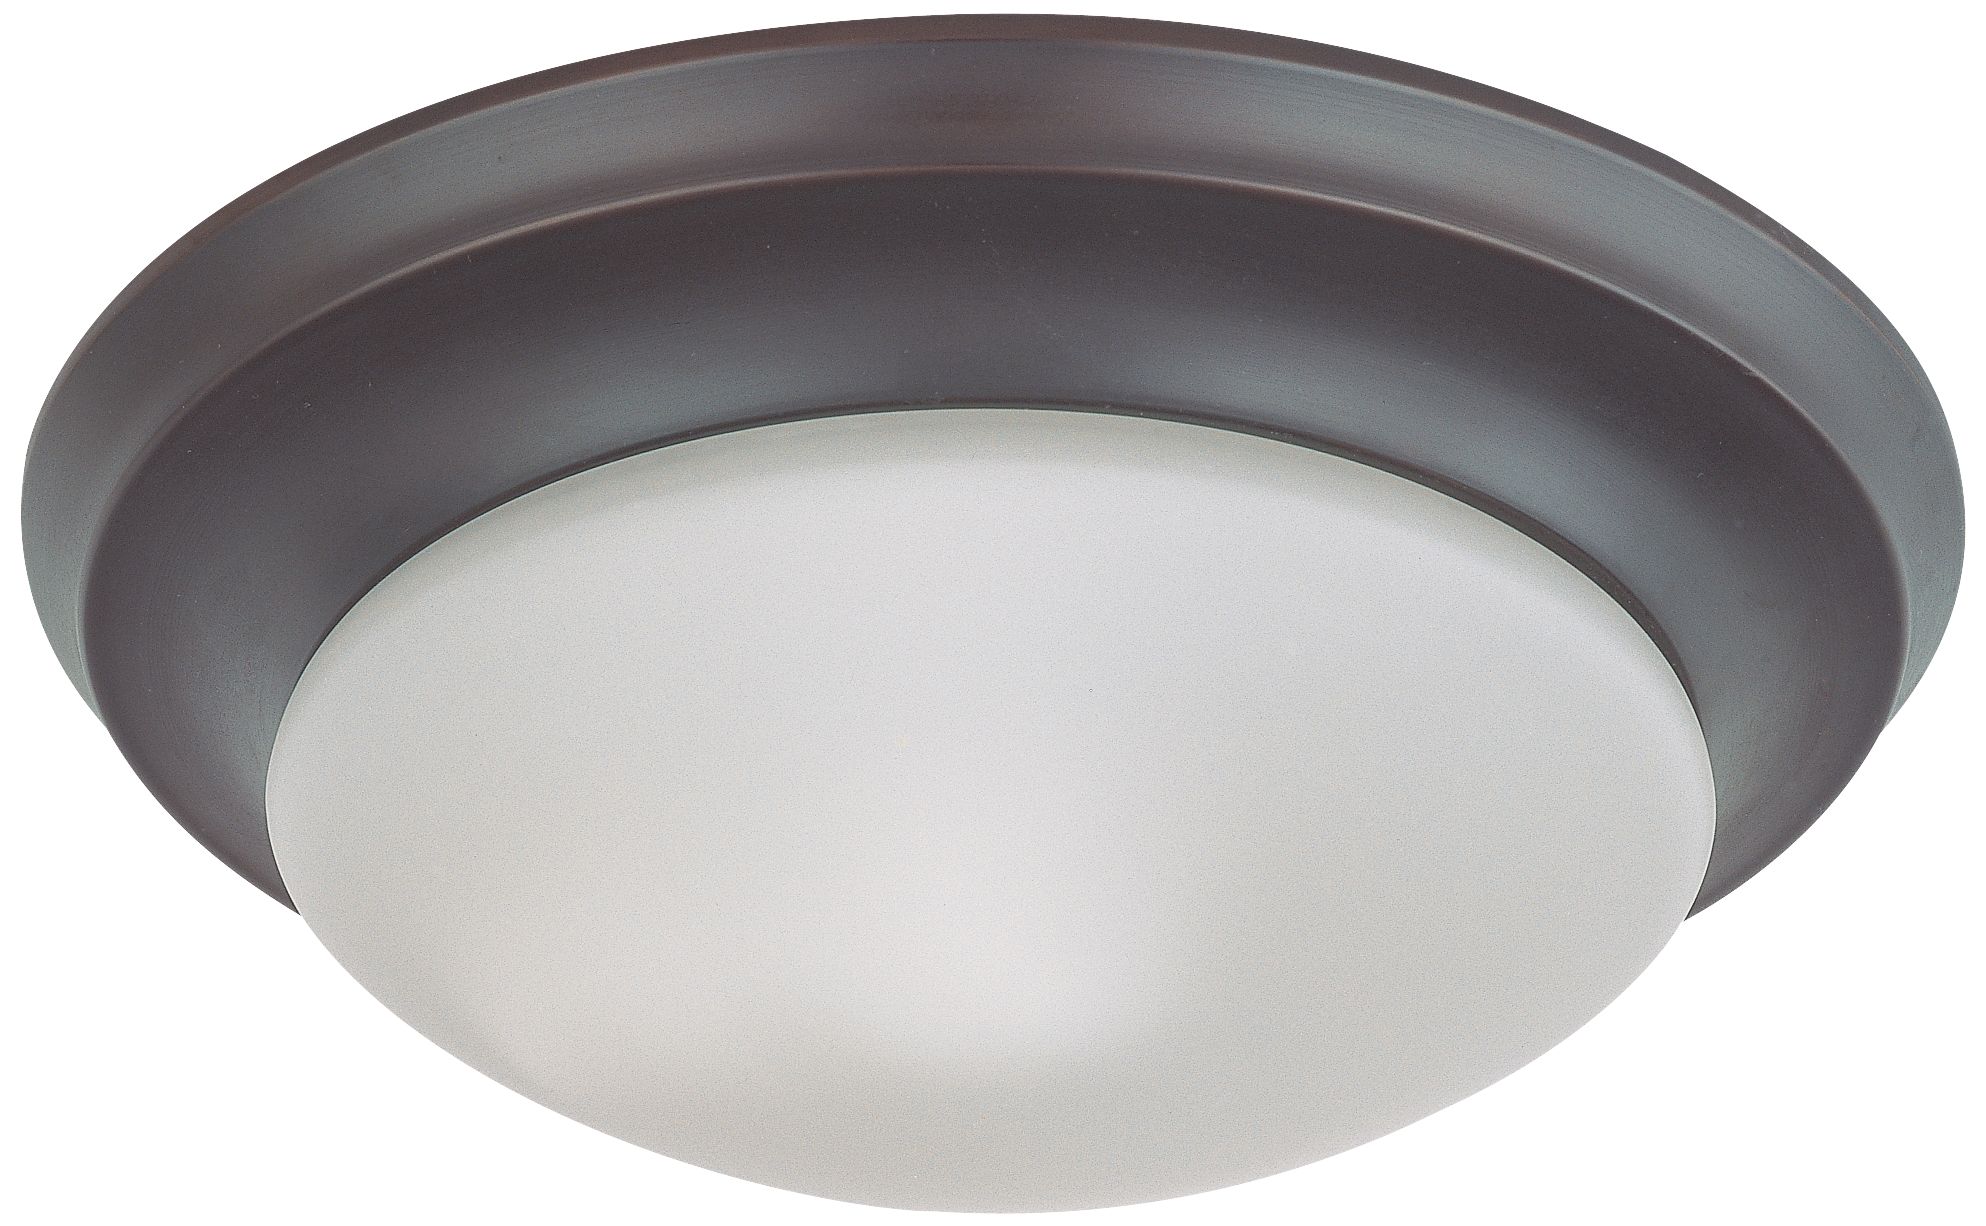 LED Light; 11-3/4 in.; Flush Mounted; Frosted Glass; Mahogany Bronze Finish